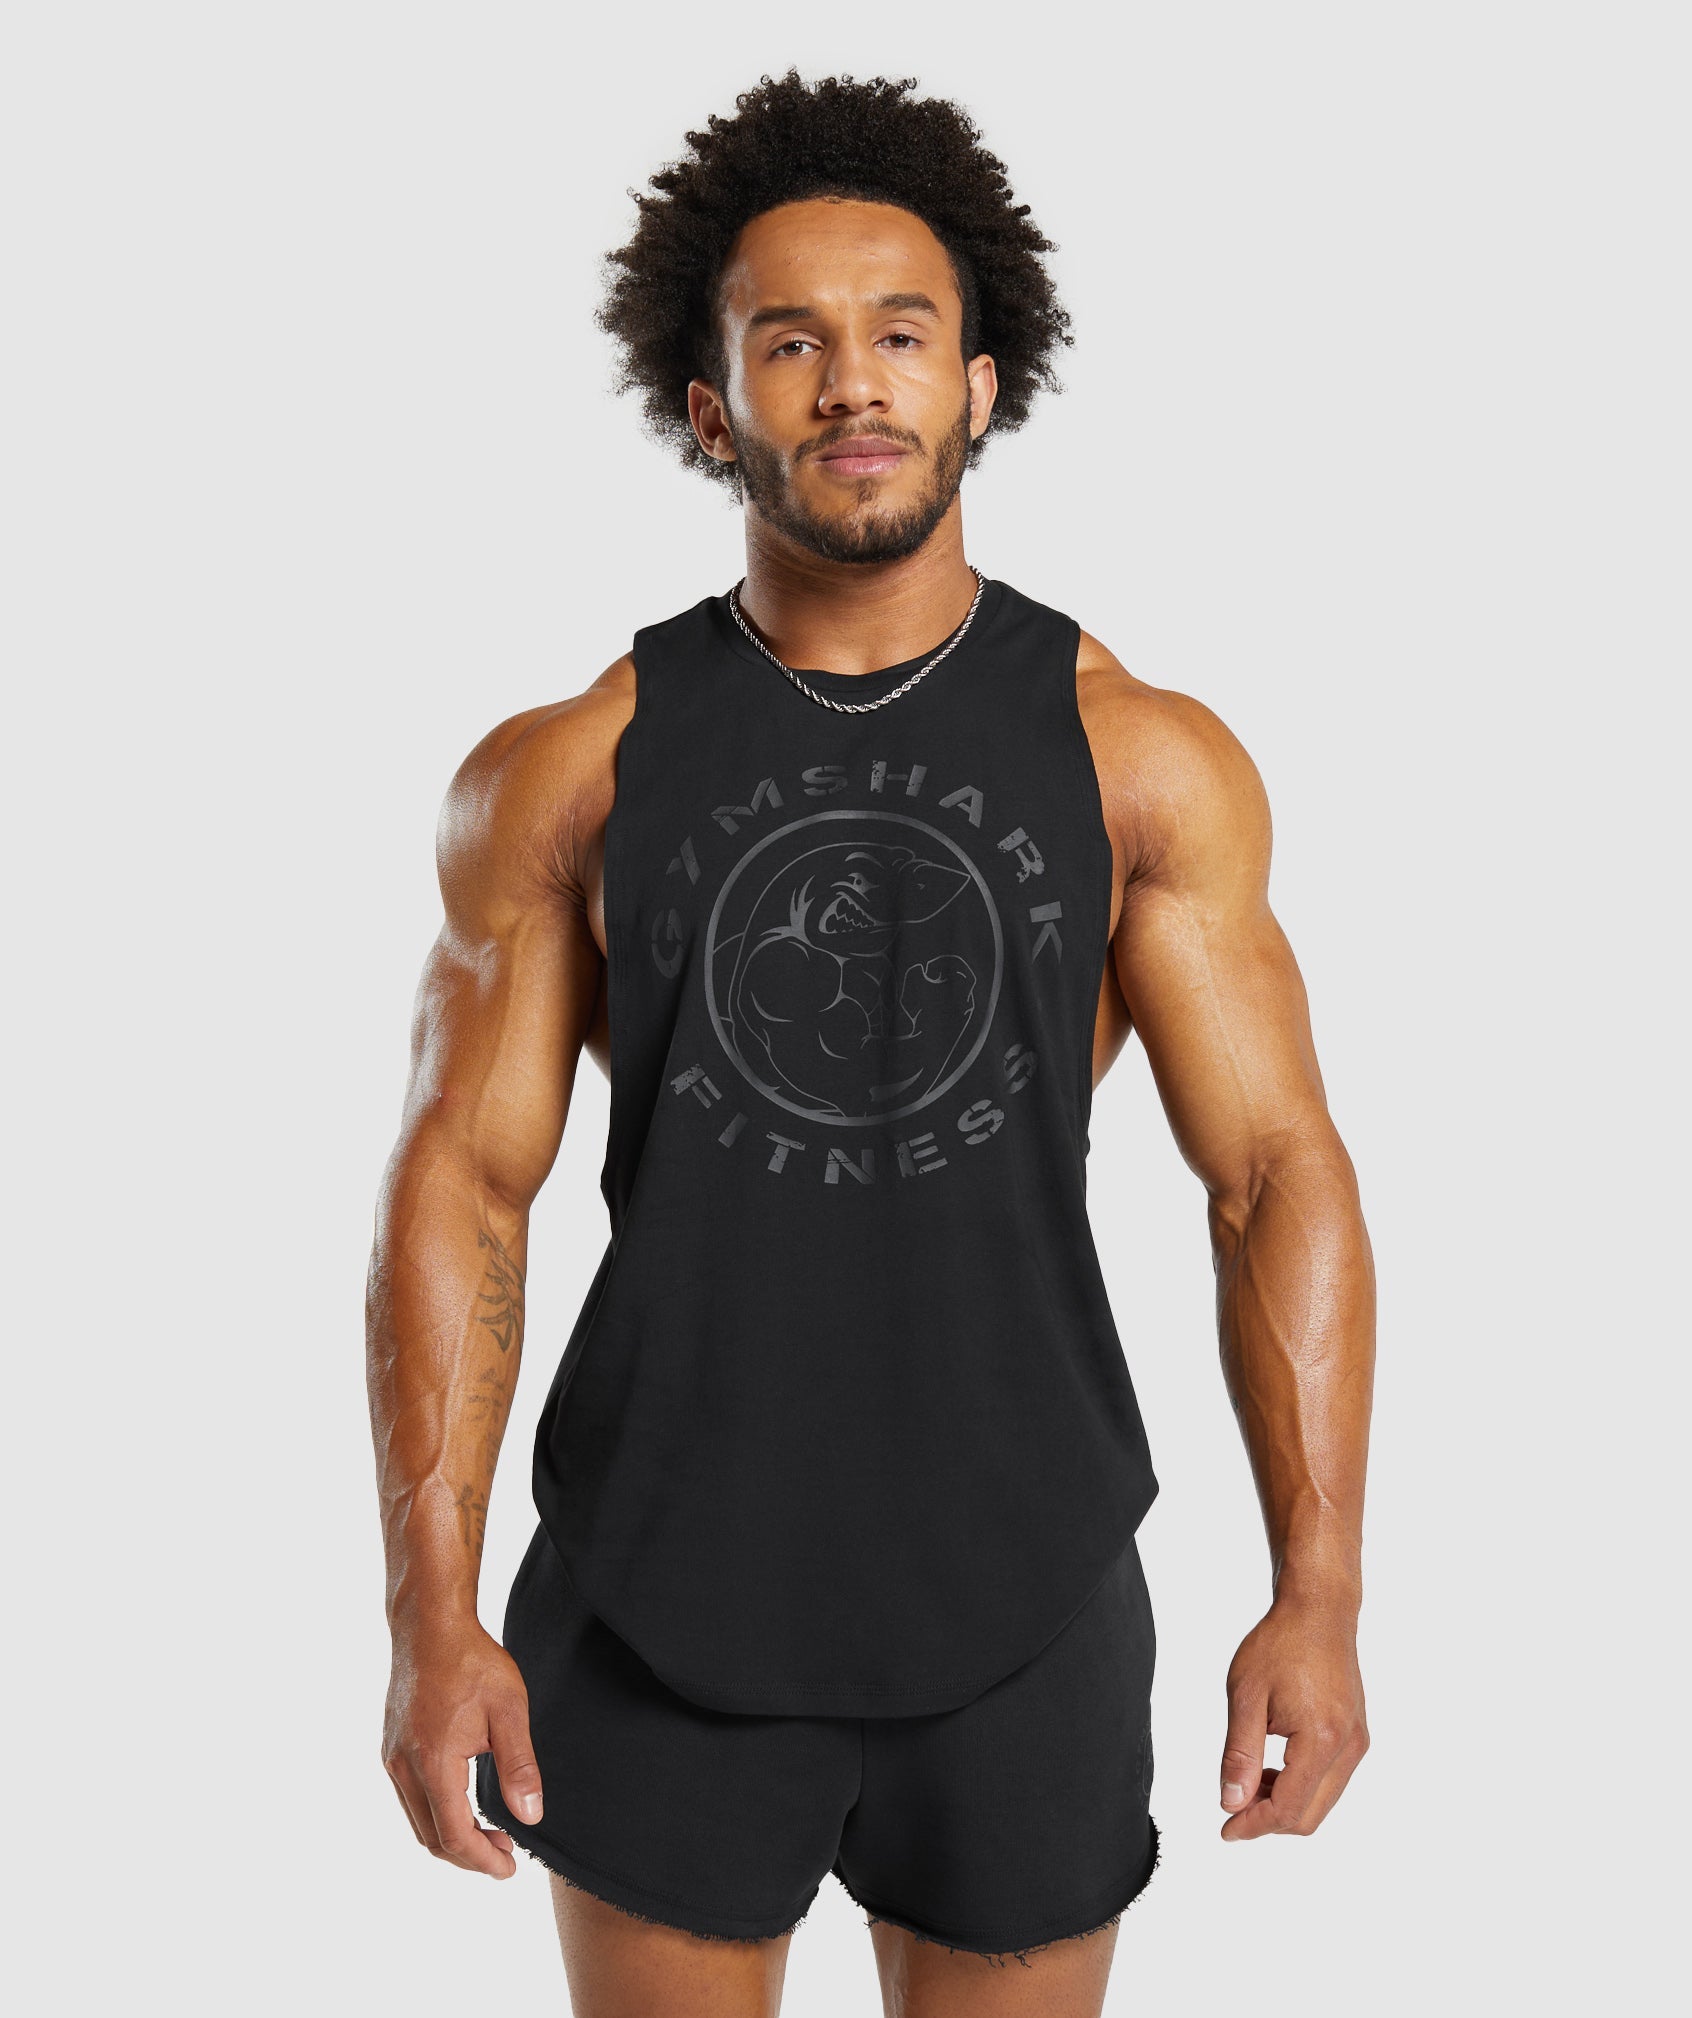 Gifts for Gym Lovers - Gift ideas for Men - Gymshark